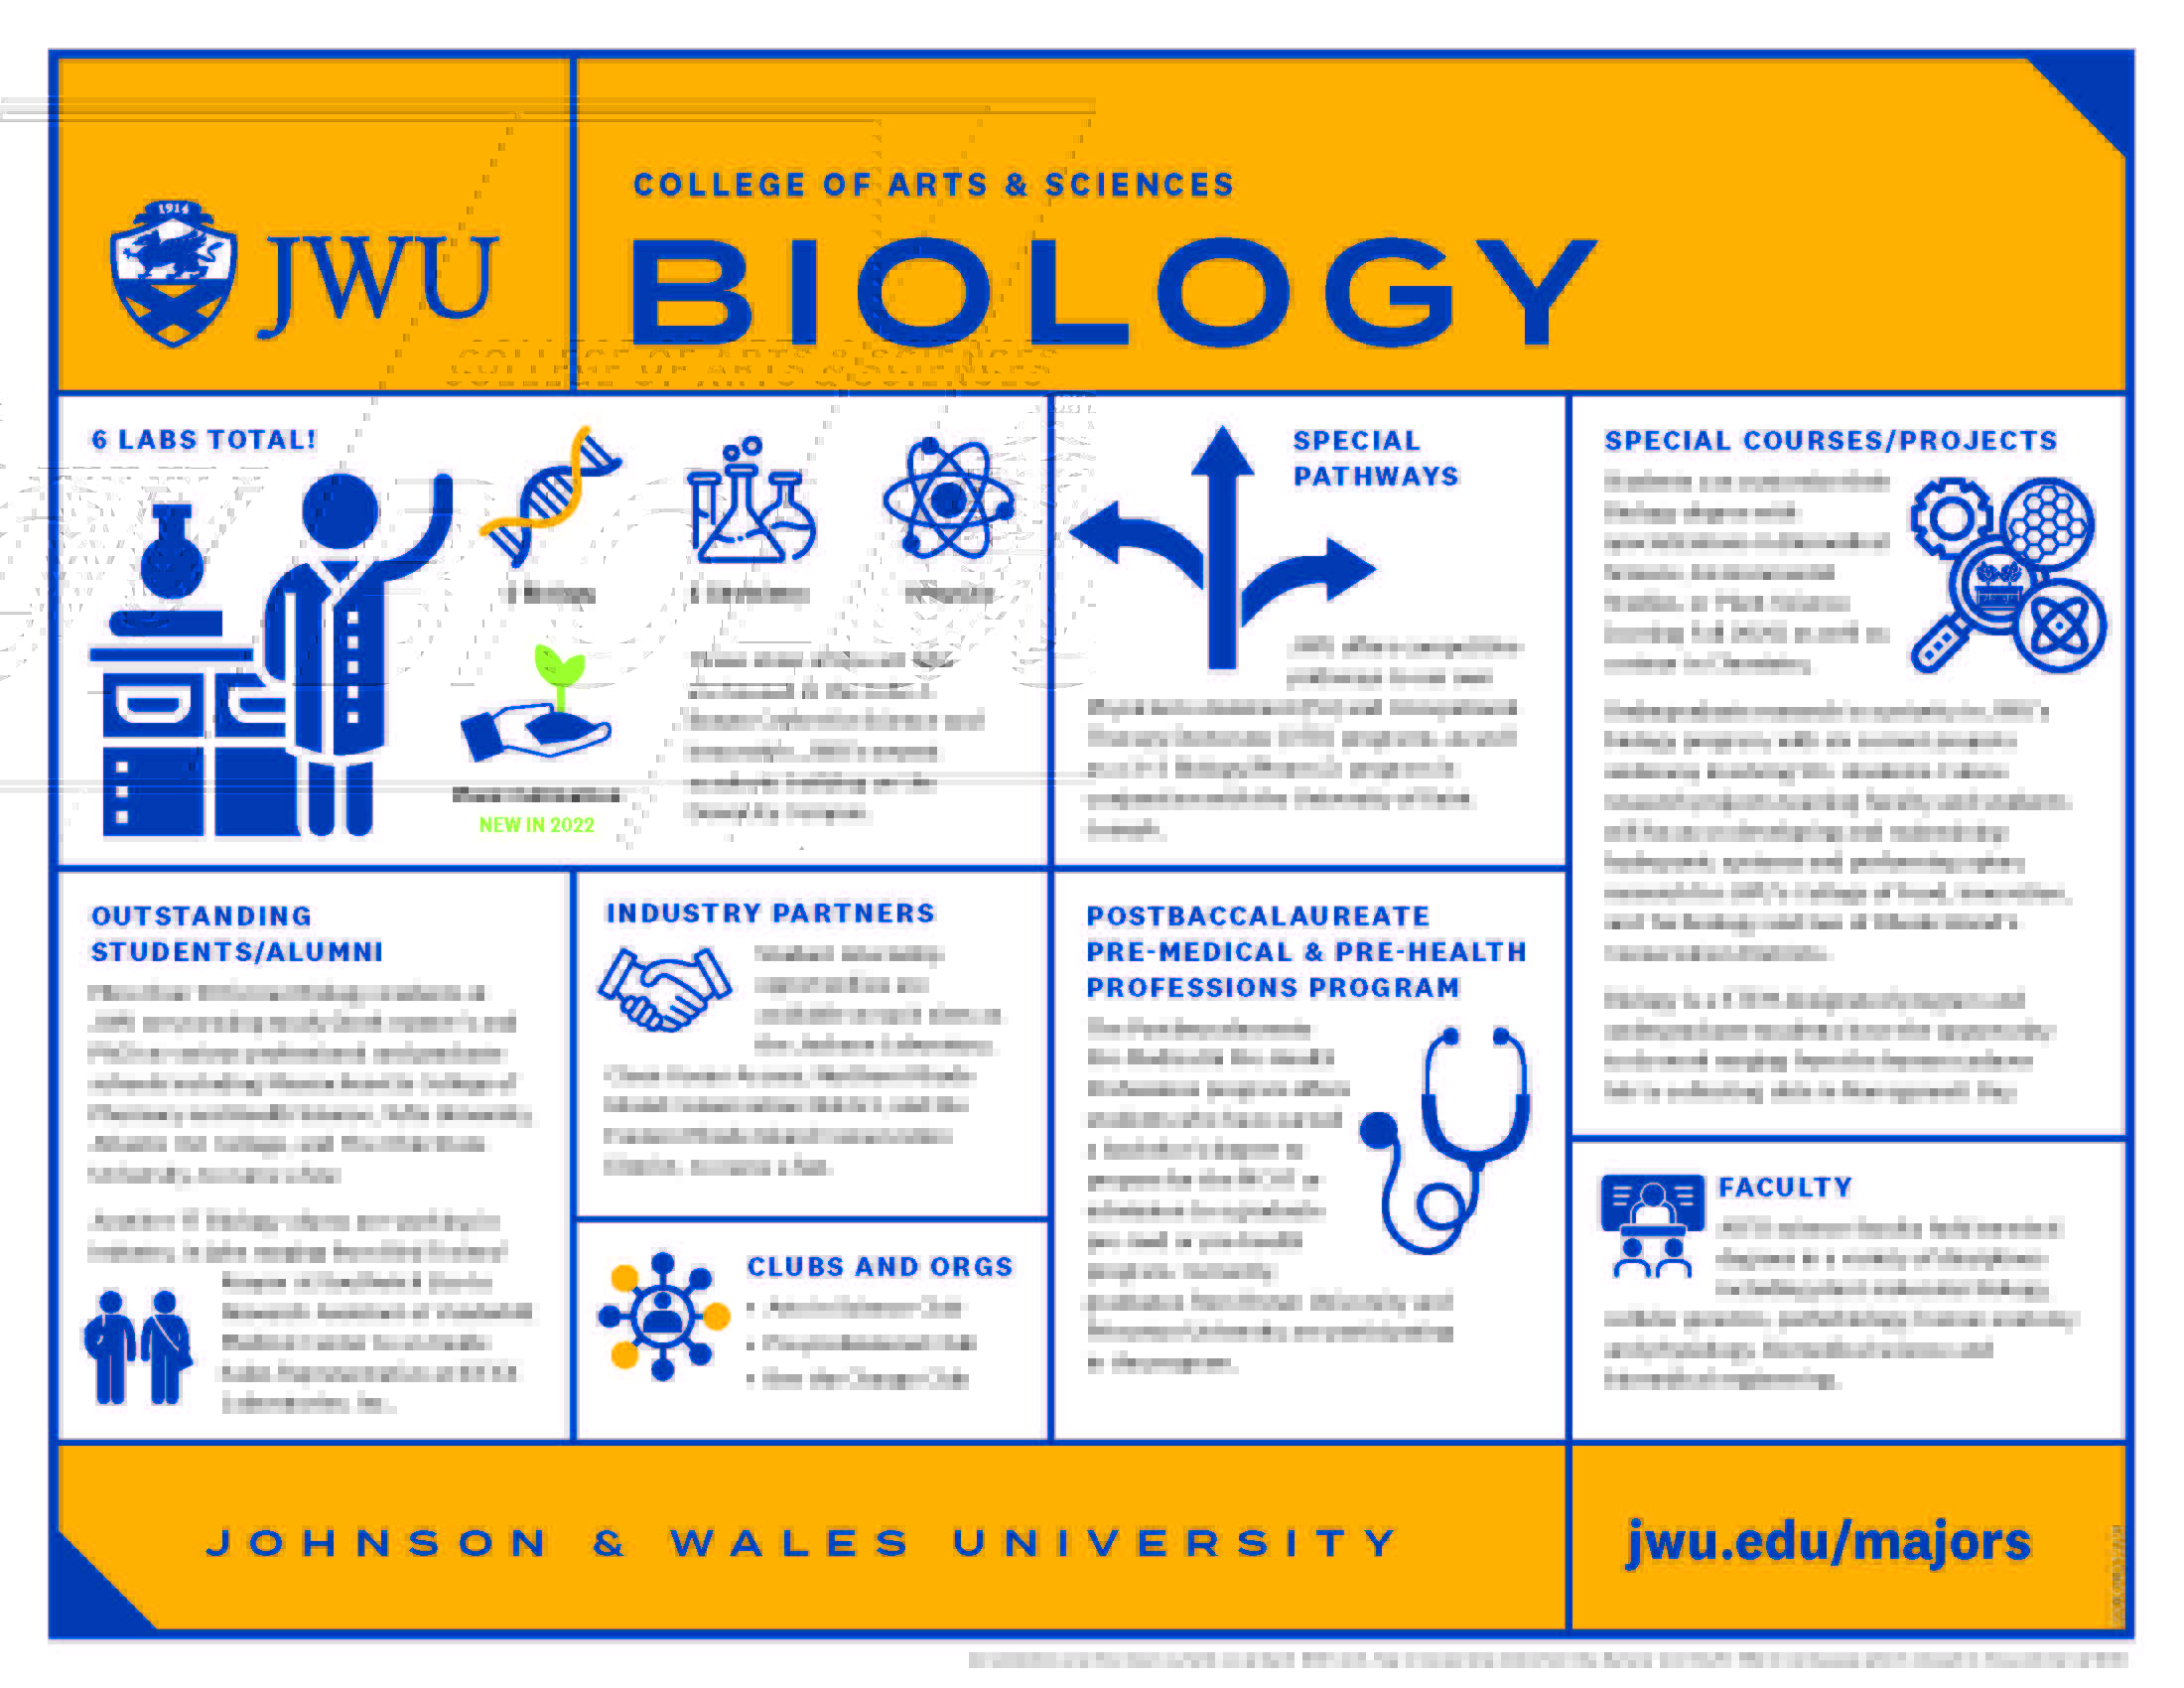 infographic depicting features of the JWU Biology B.S. program